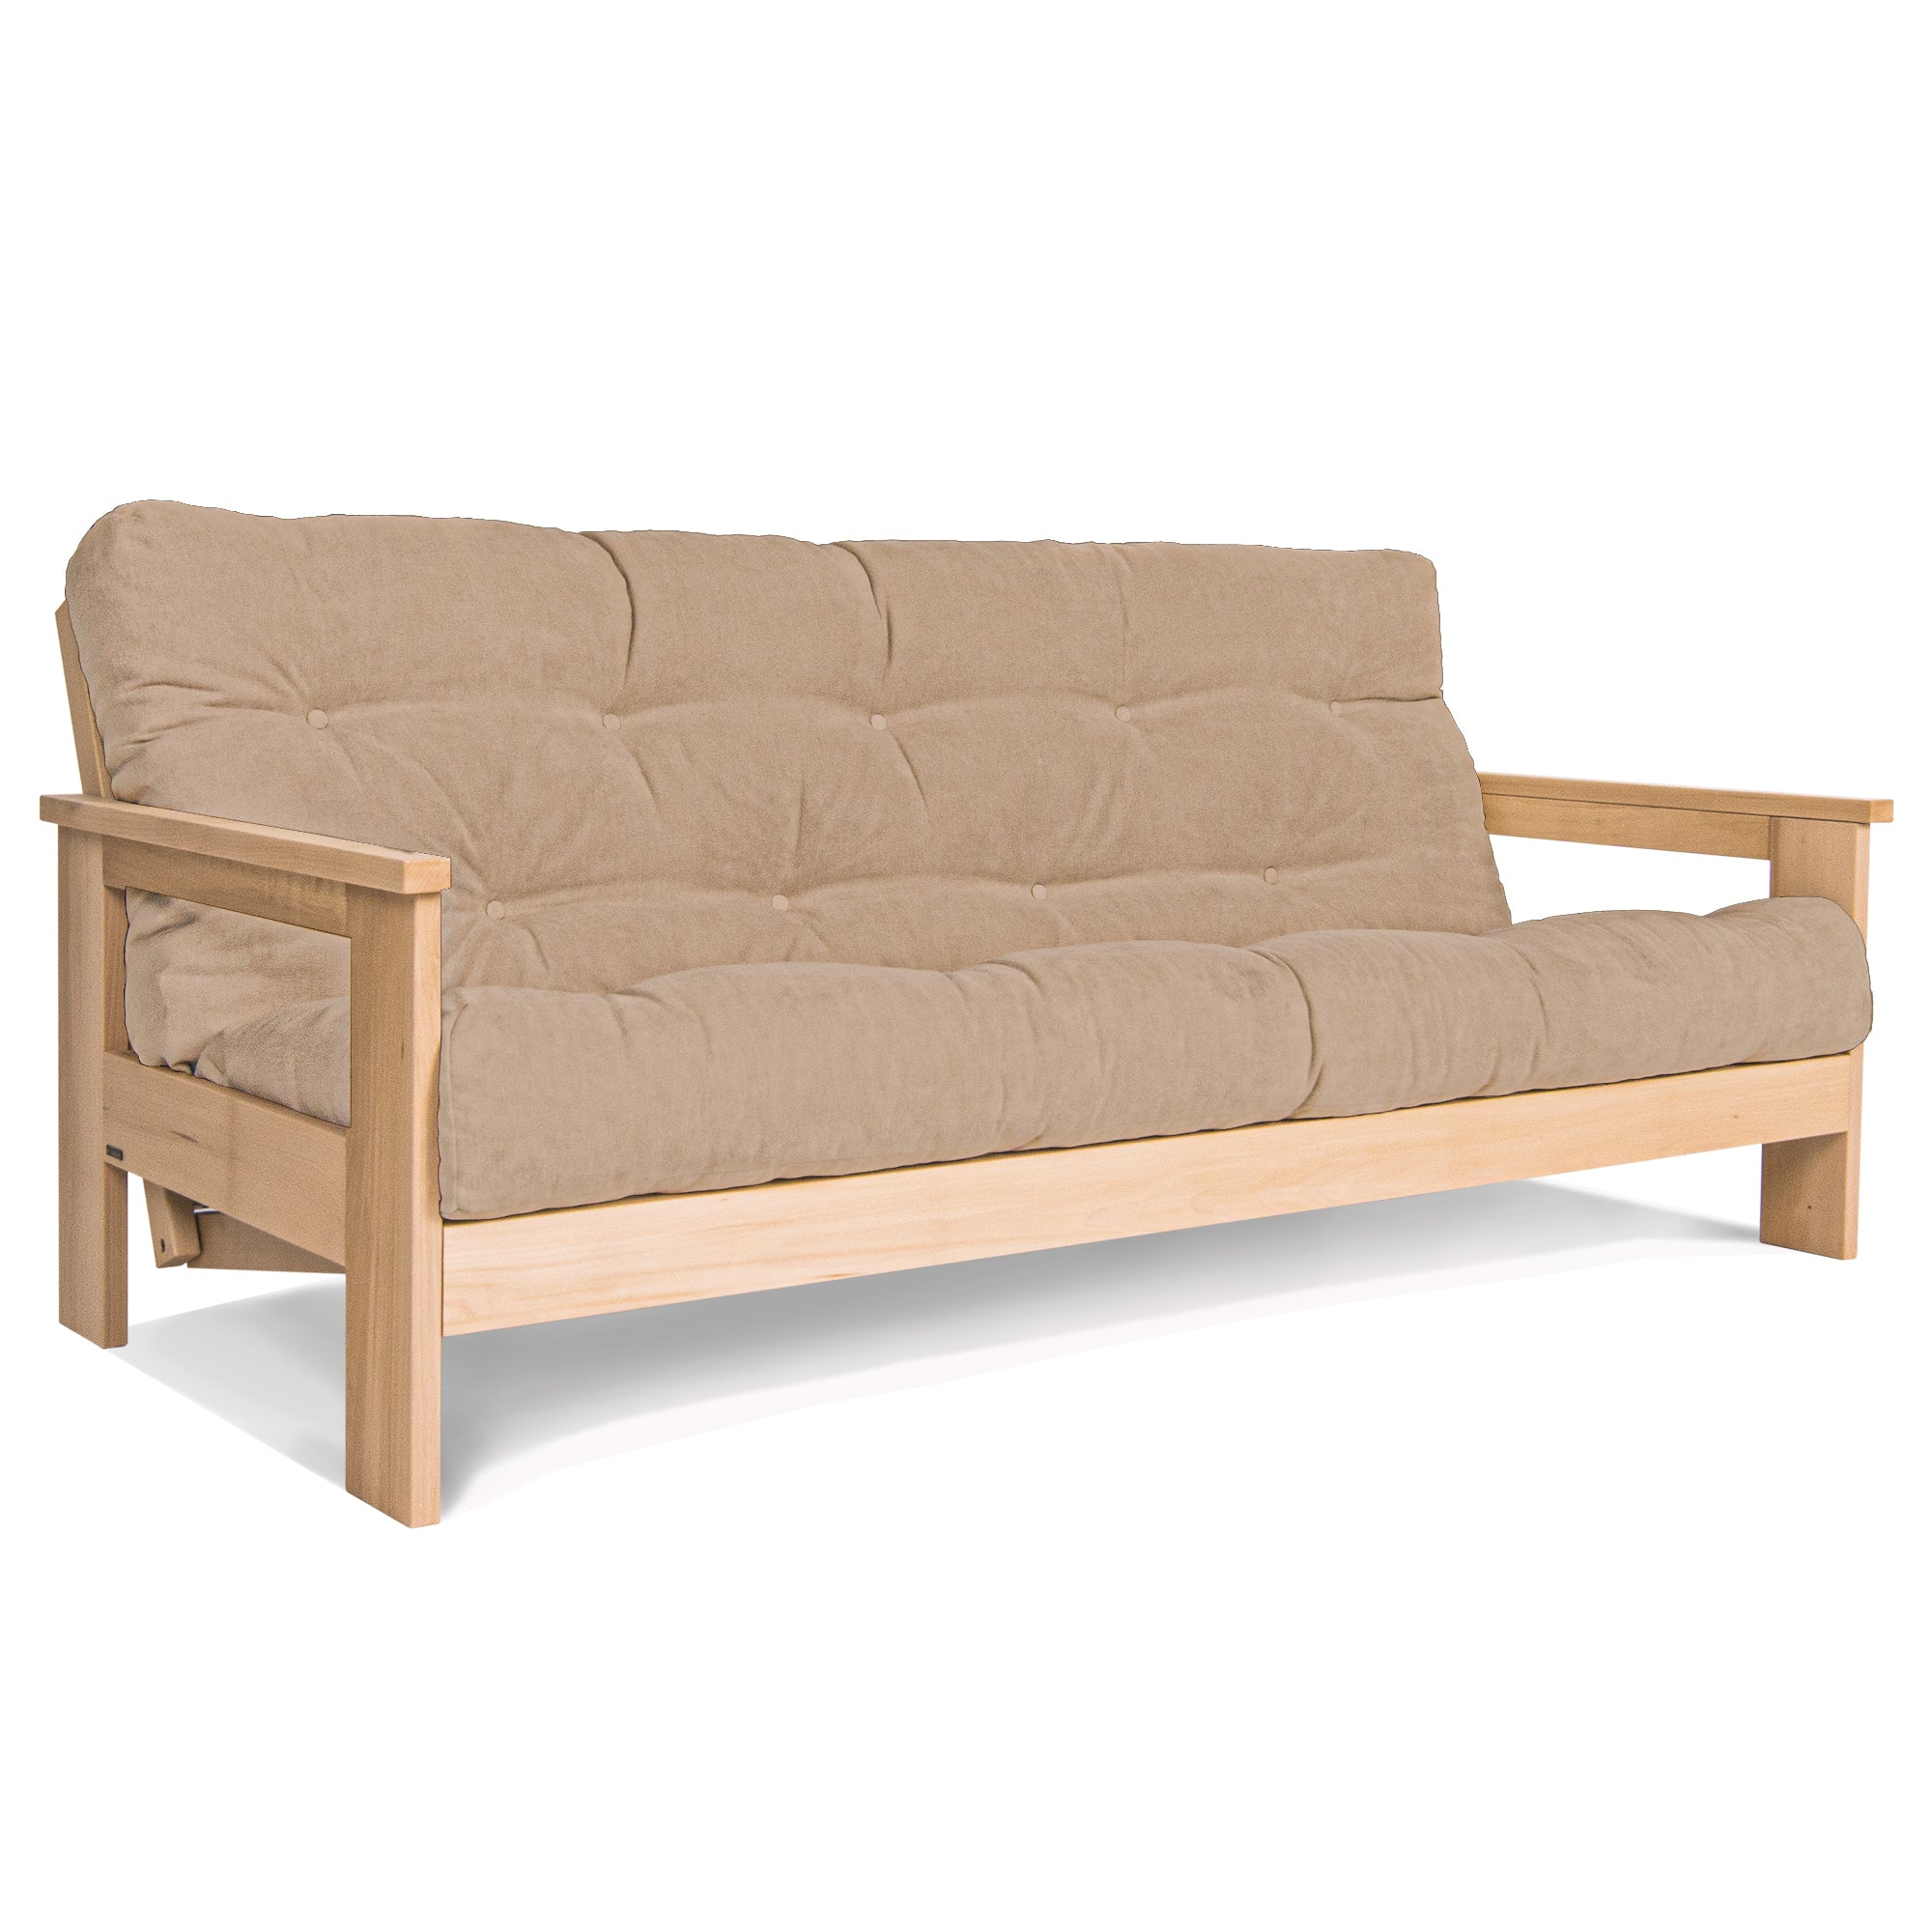 MEXICO Folding Sofa Bed-Beech Wood Frame-Natural Colour-beige fabric